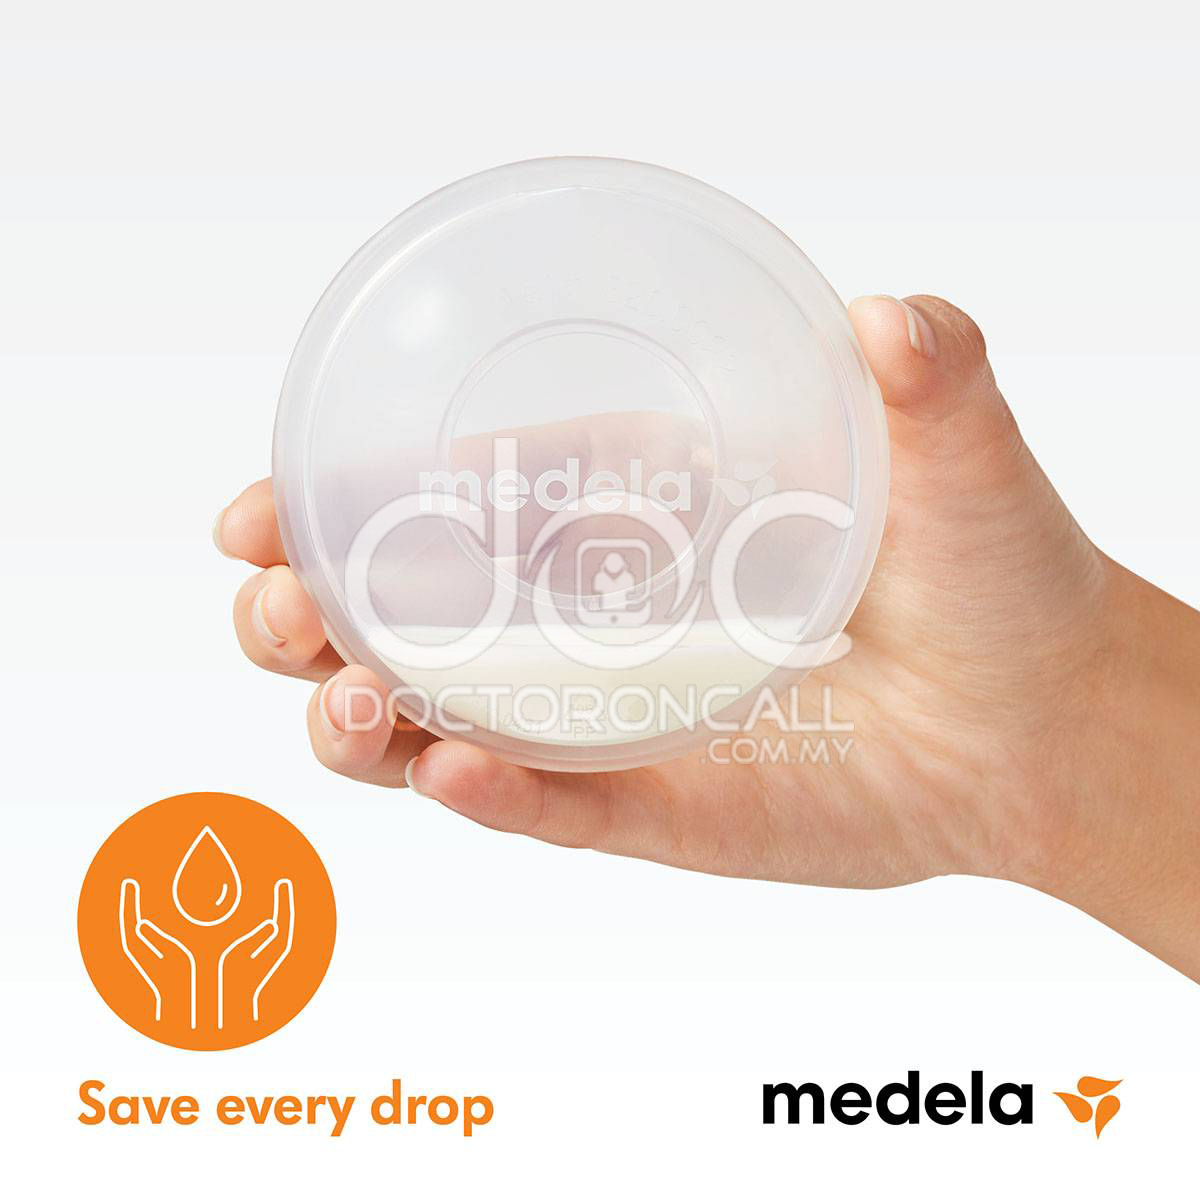 Medela Introduces New Silicone Breast Milk Collector to Ensure